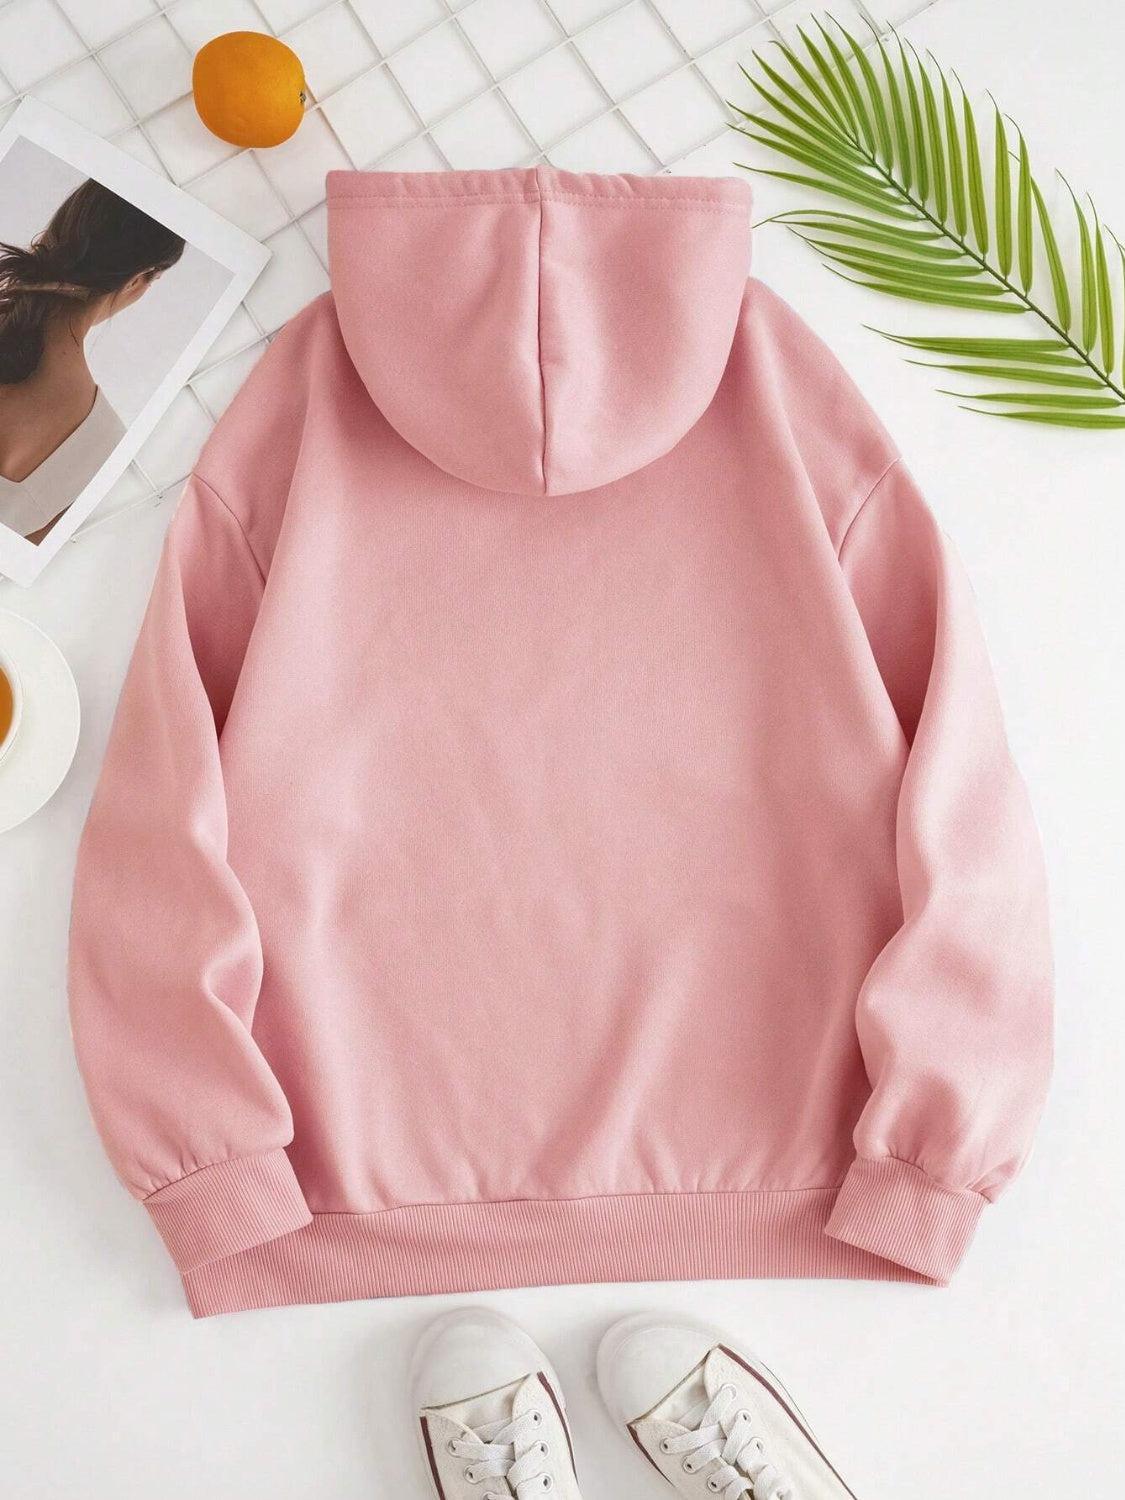 a pink hoodie with a pair of white shoes next to it